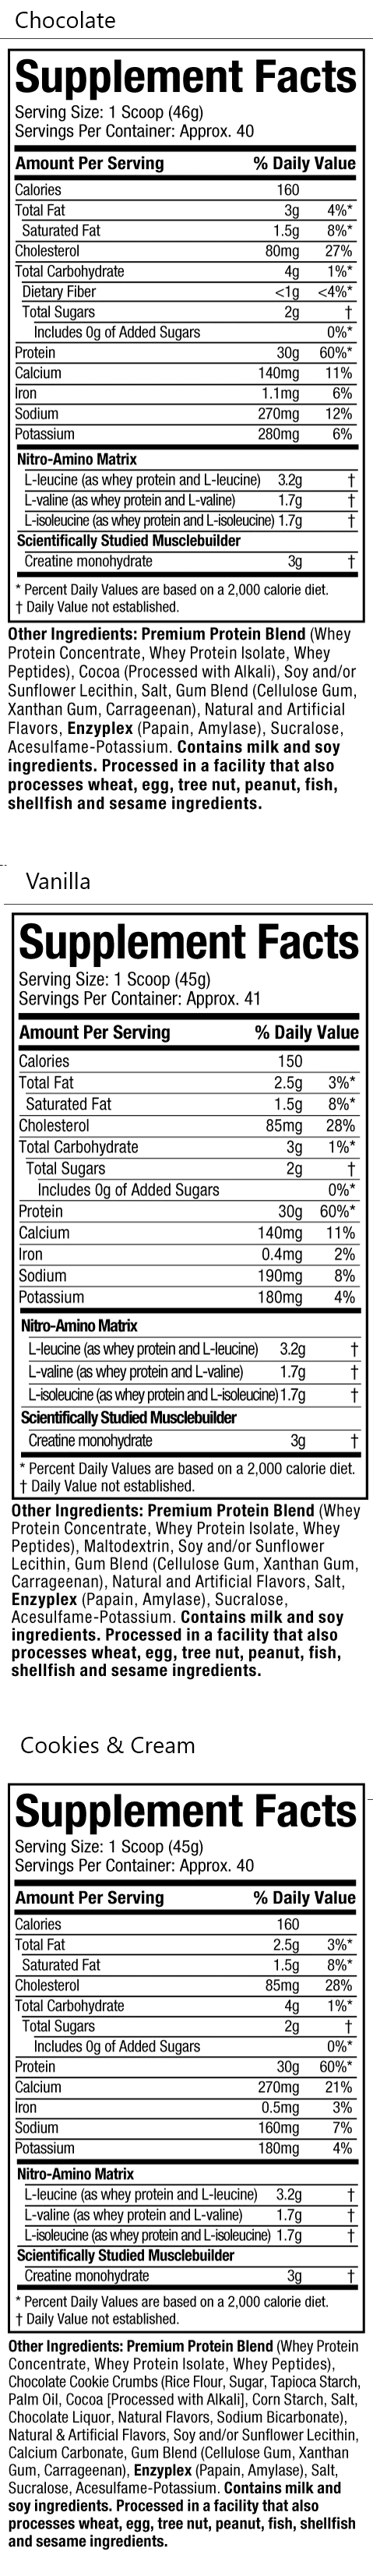 Nutrition facts for chocolate supplement with serving size of 1 scoop, containing whey protein, L-leucine, L-valine, L-isoleucine, and creatine monohydrate.